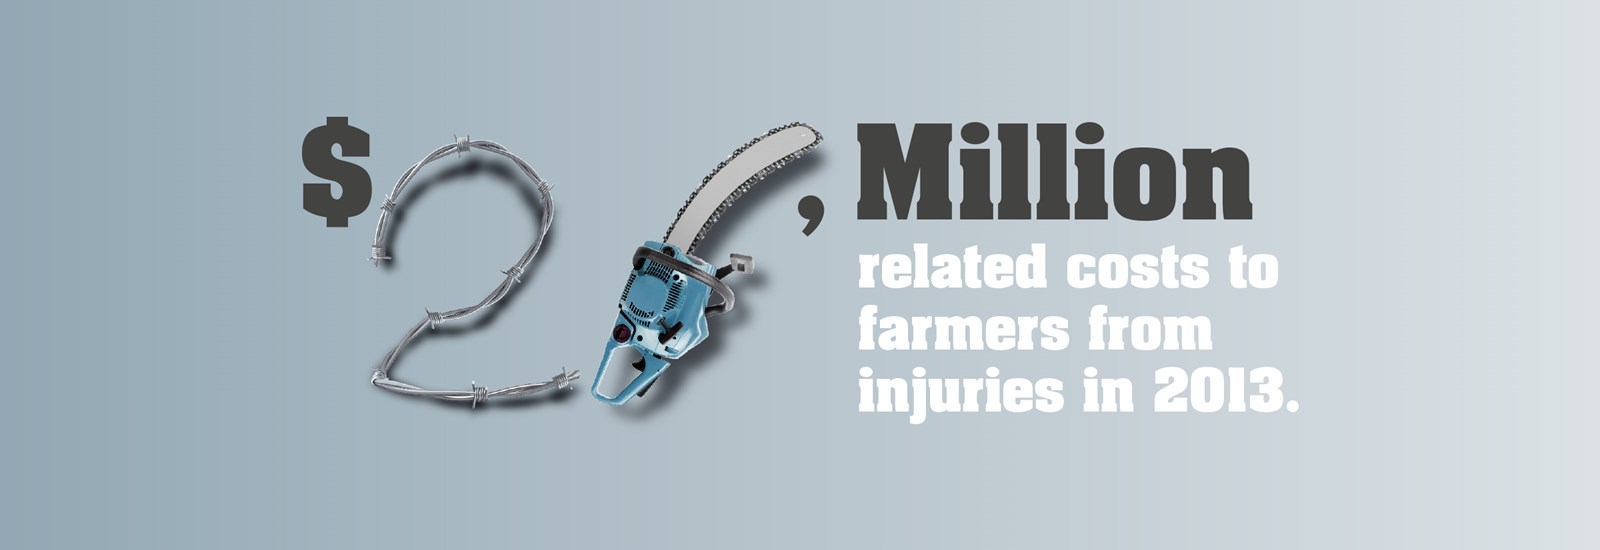 26 Million related costs to farmers from injuries in 2013 